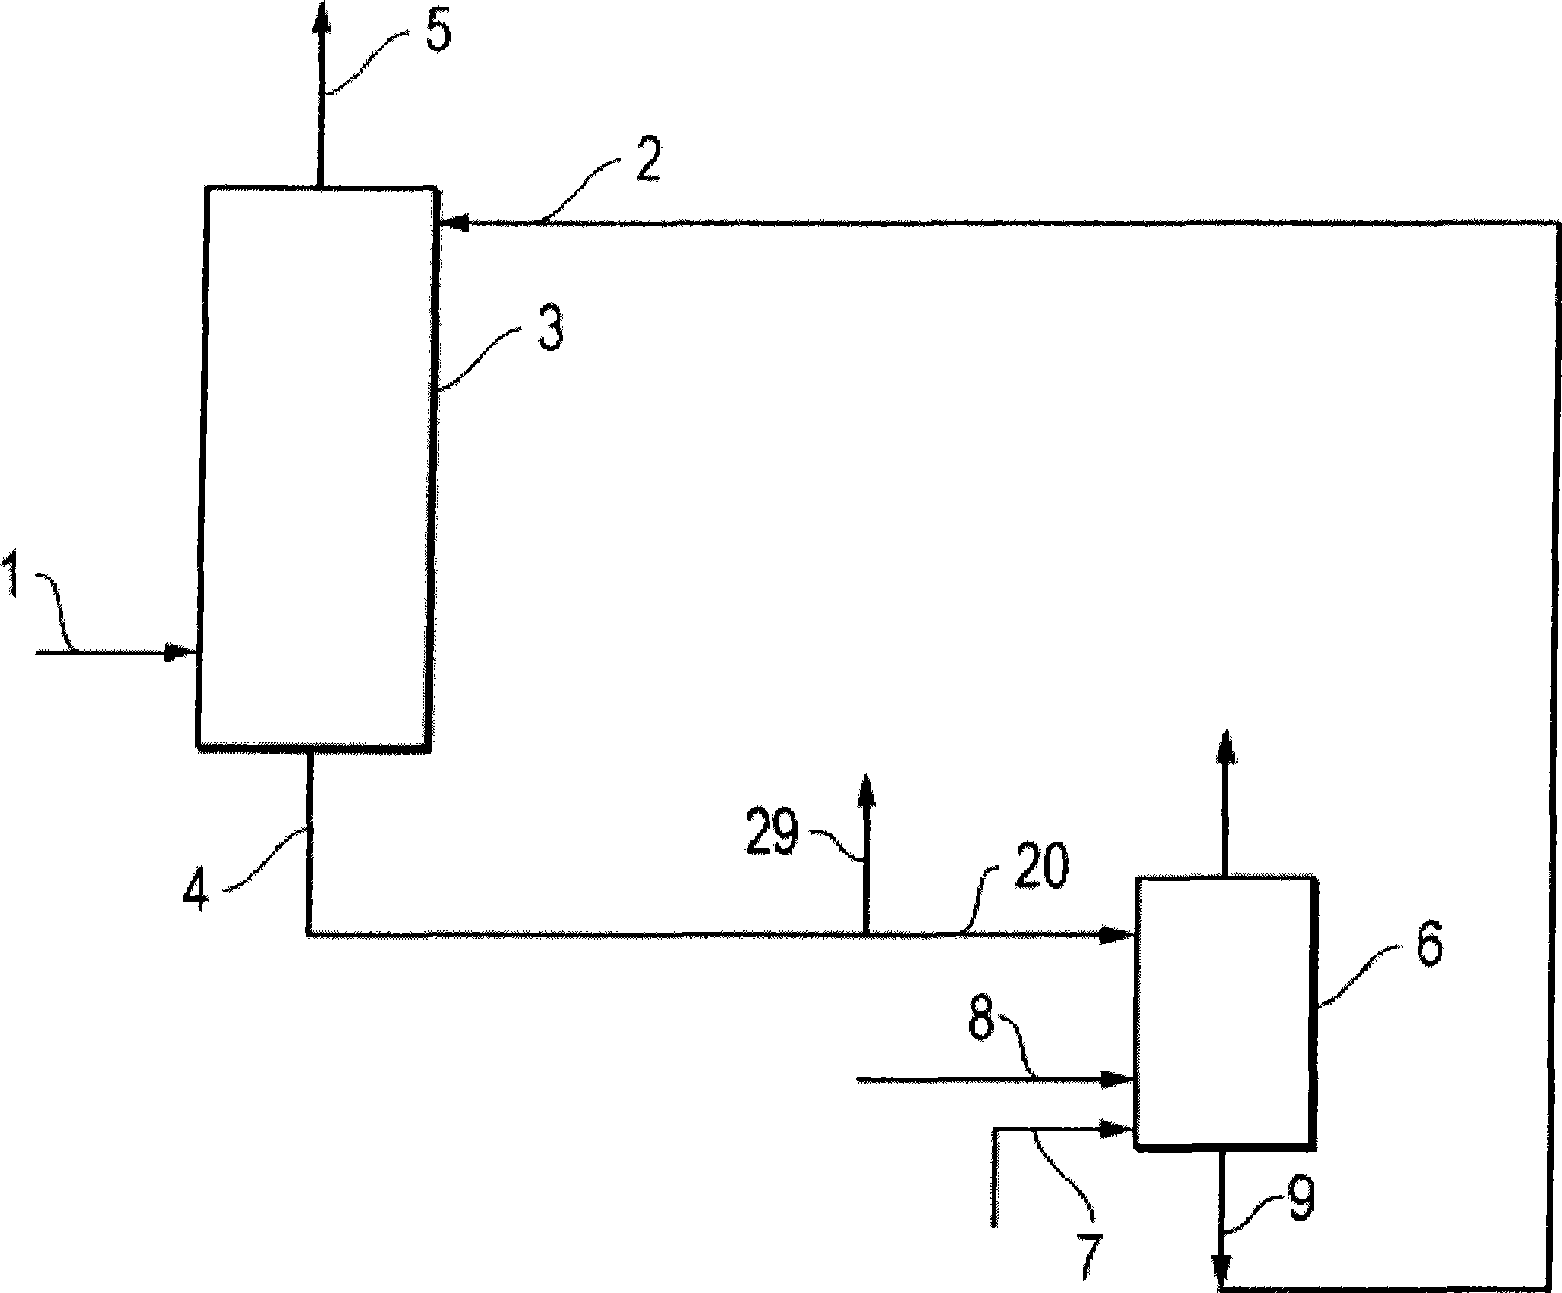 Process for treating a gas stream